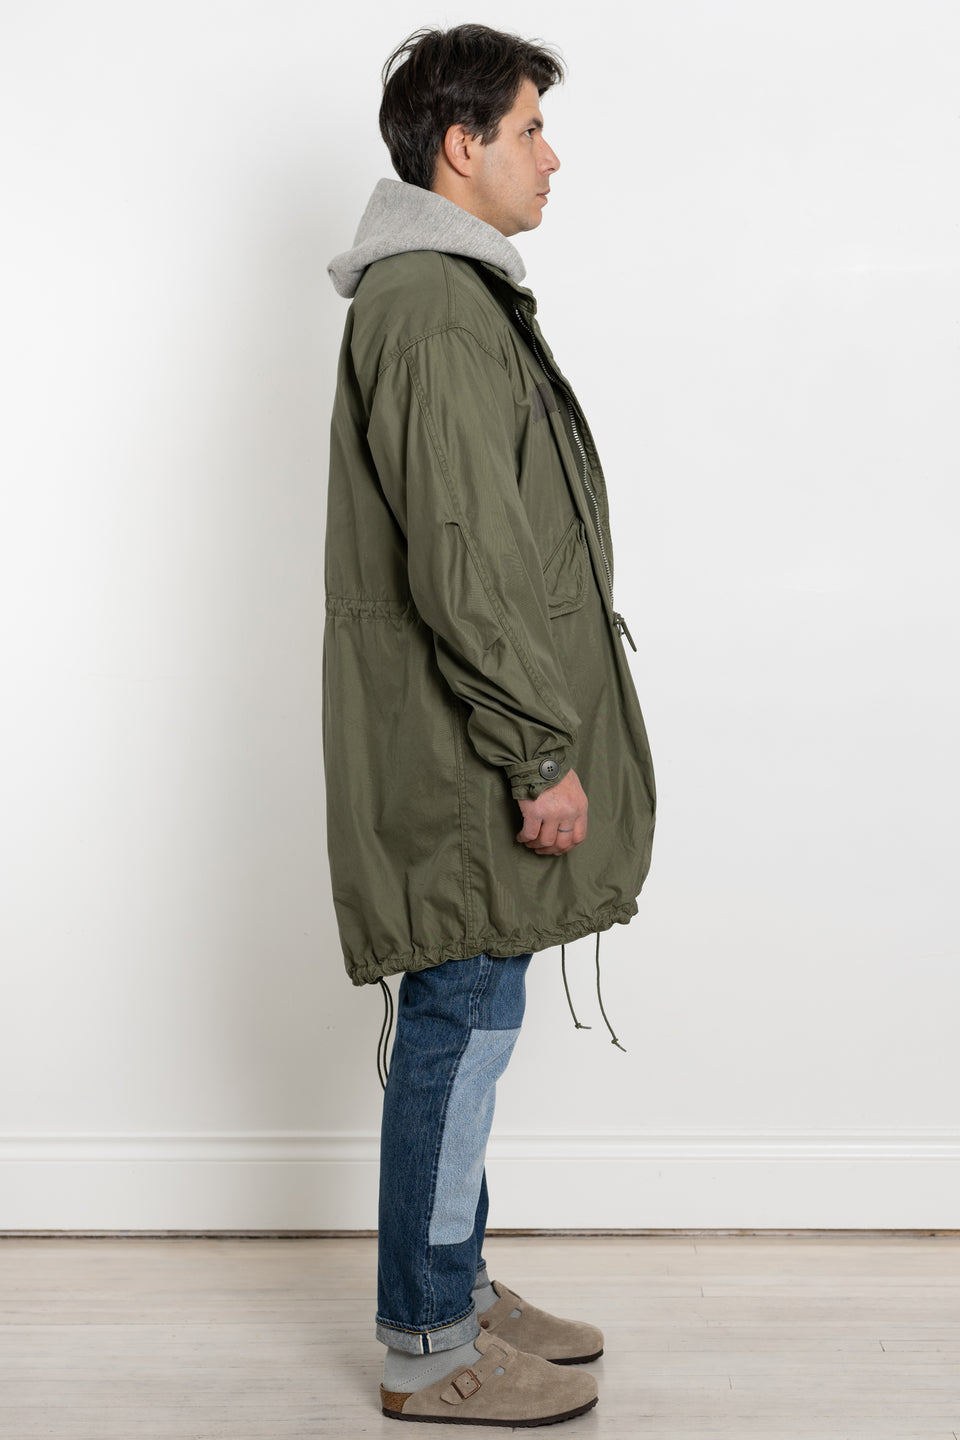 orSlow Japan 23AW FW23 Men's Collection M-65 Fish Tail Coat Army Green Calculus Victoria BC Canada